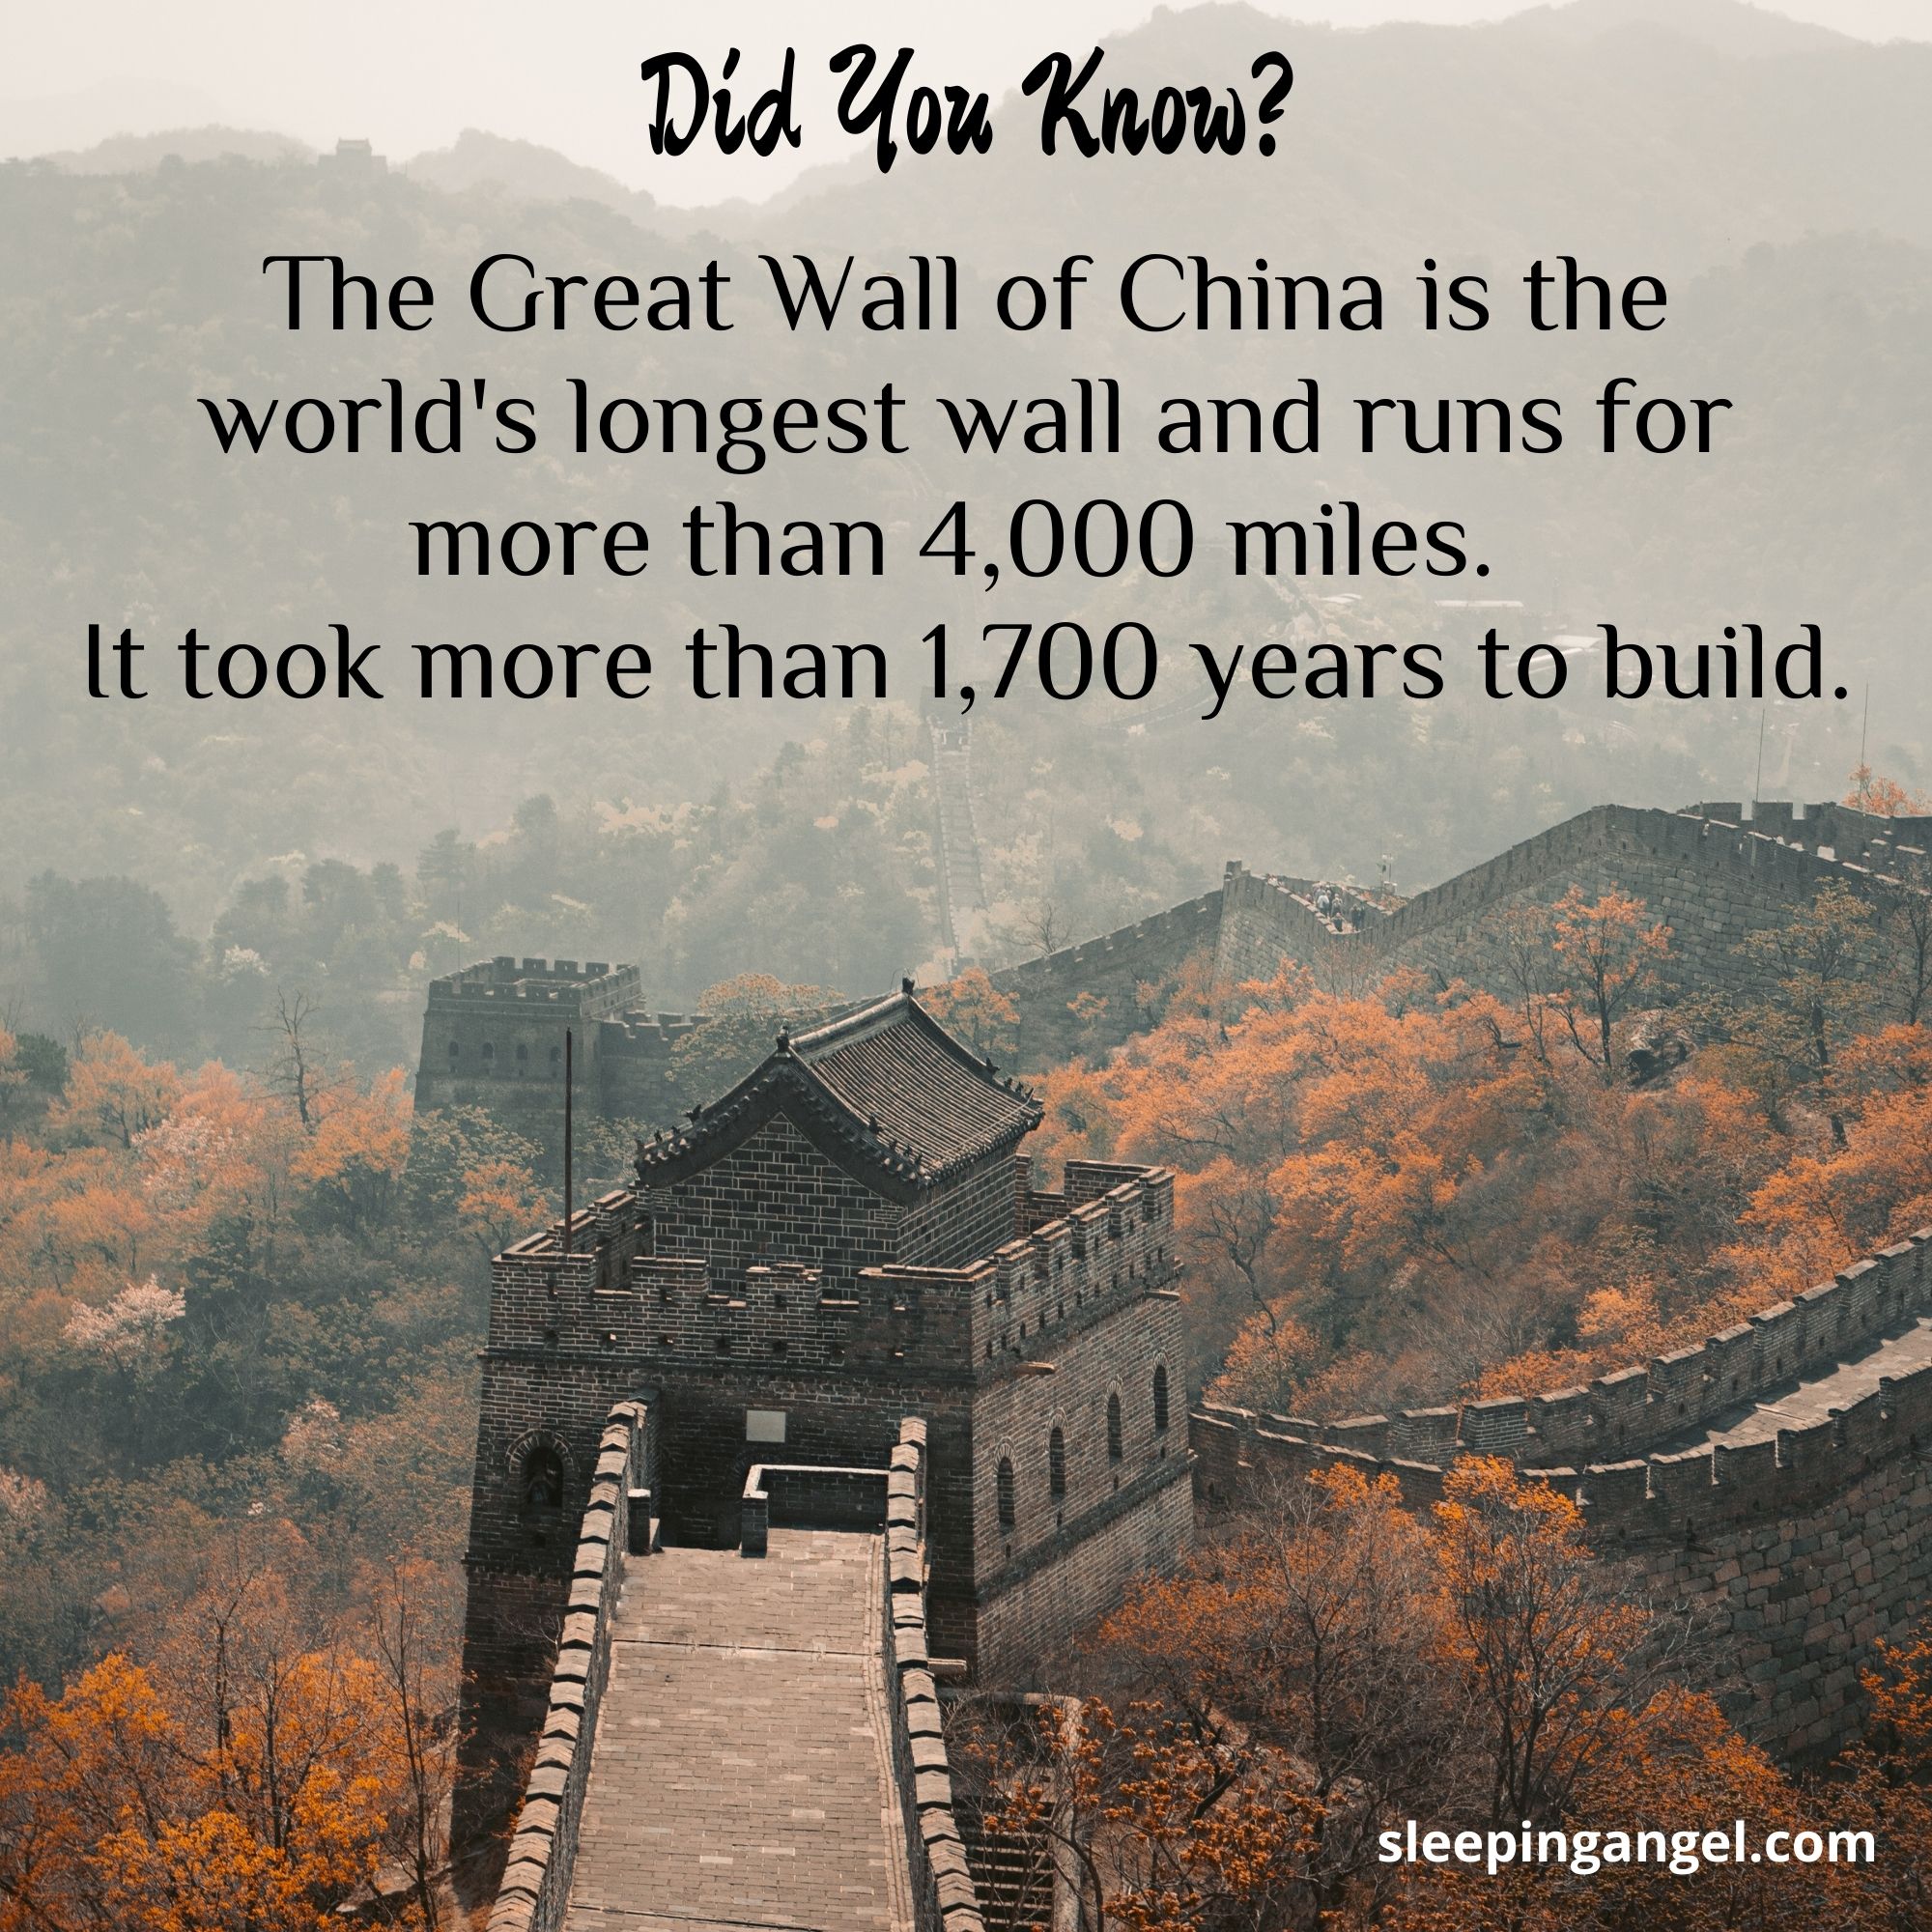 Did You Know? The Great Wall of China